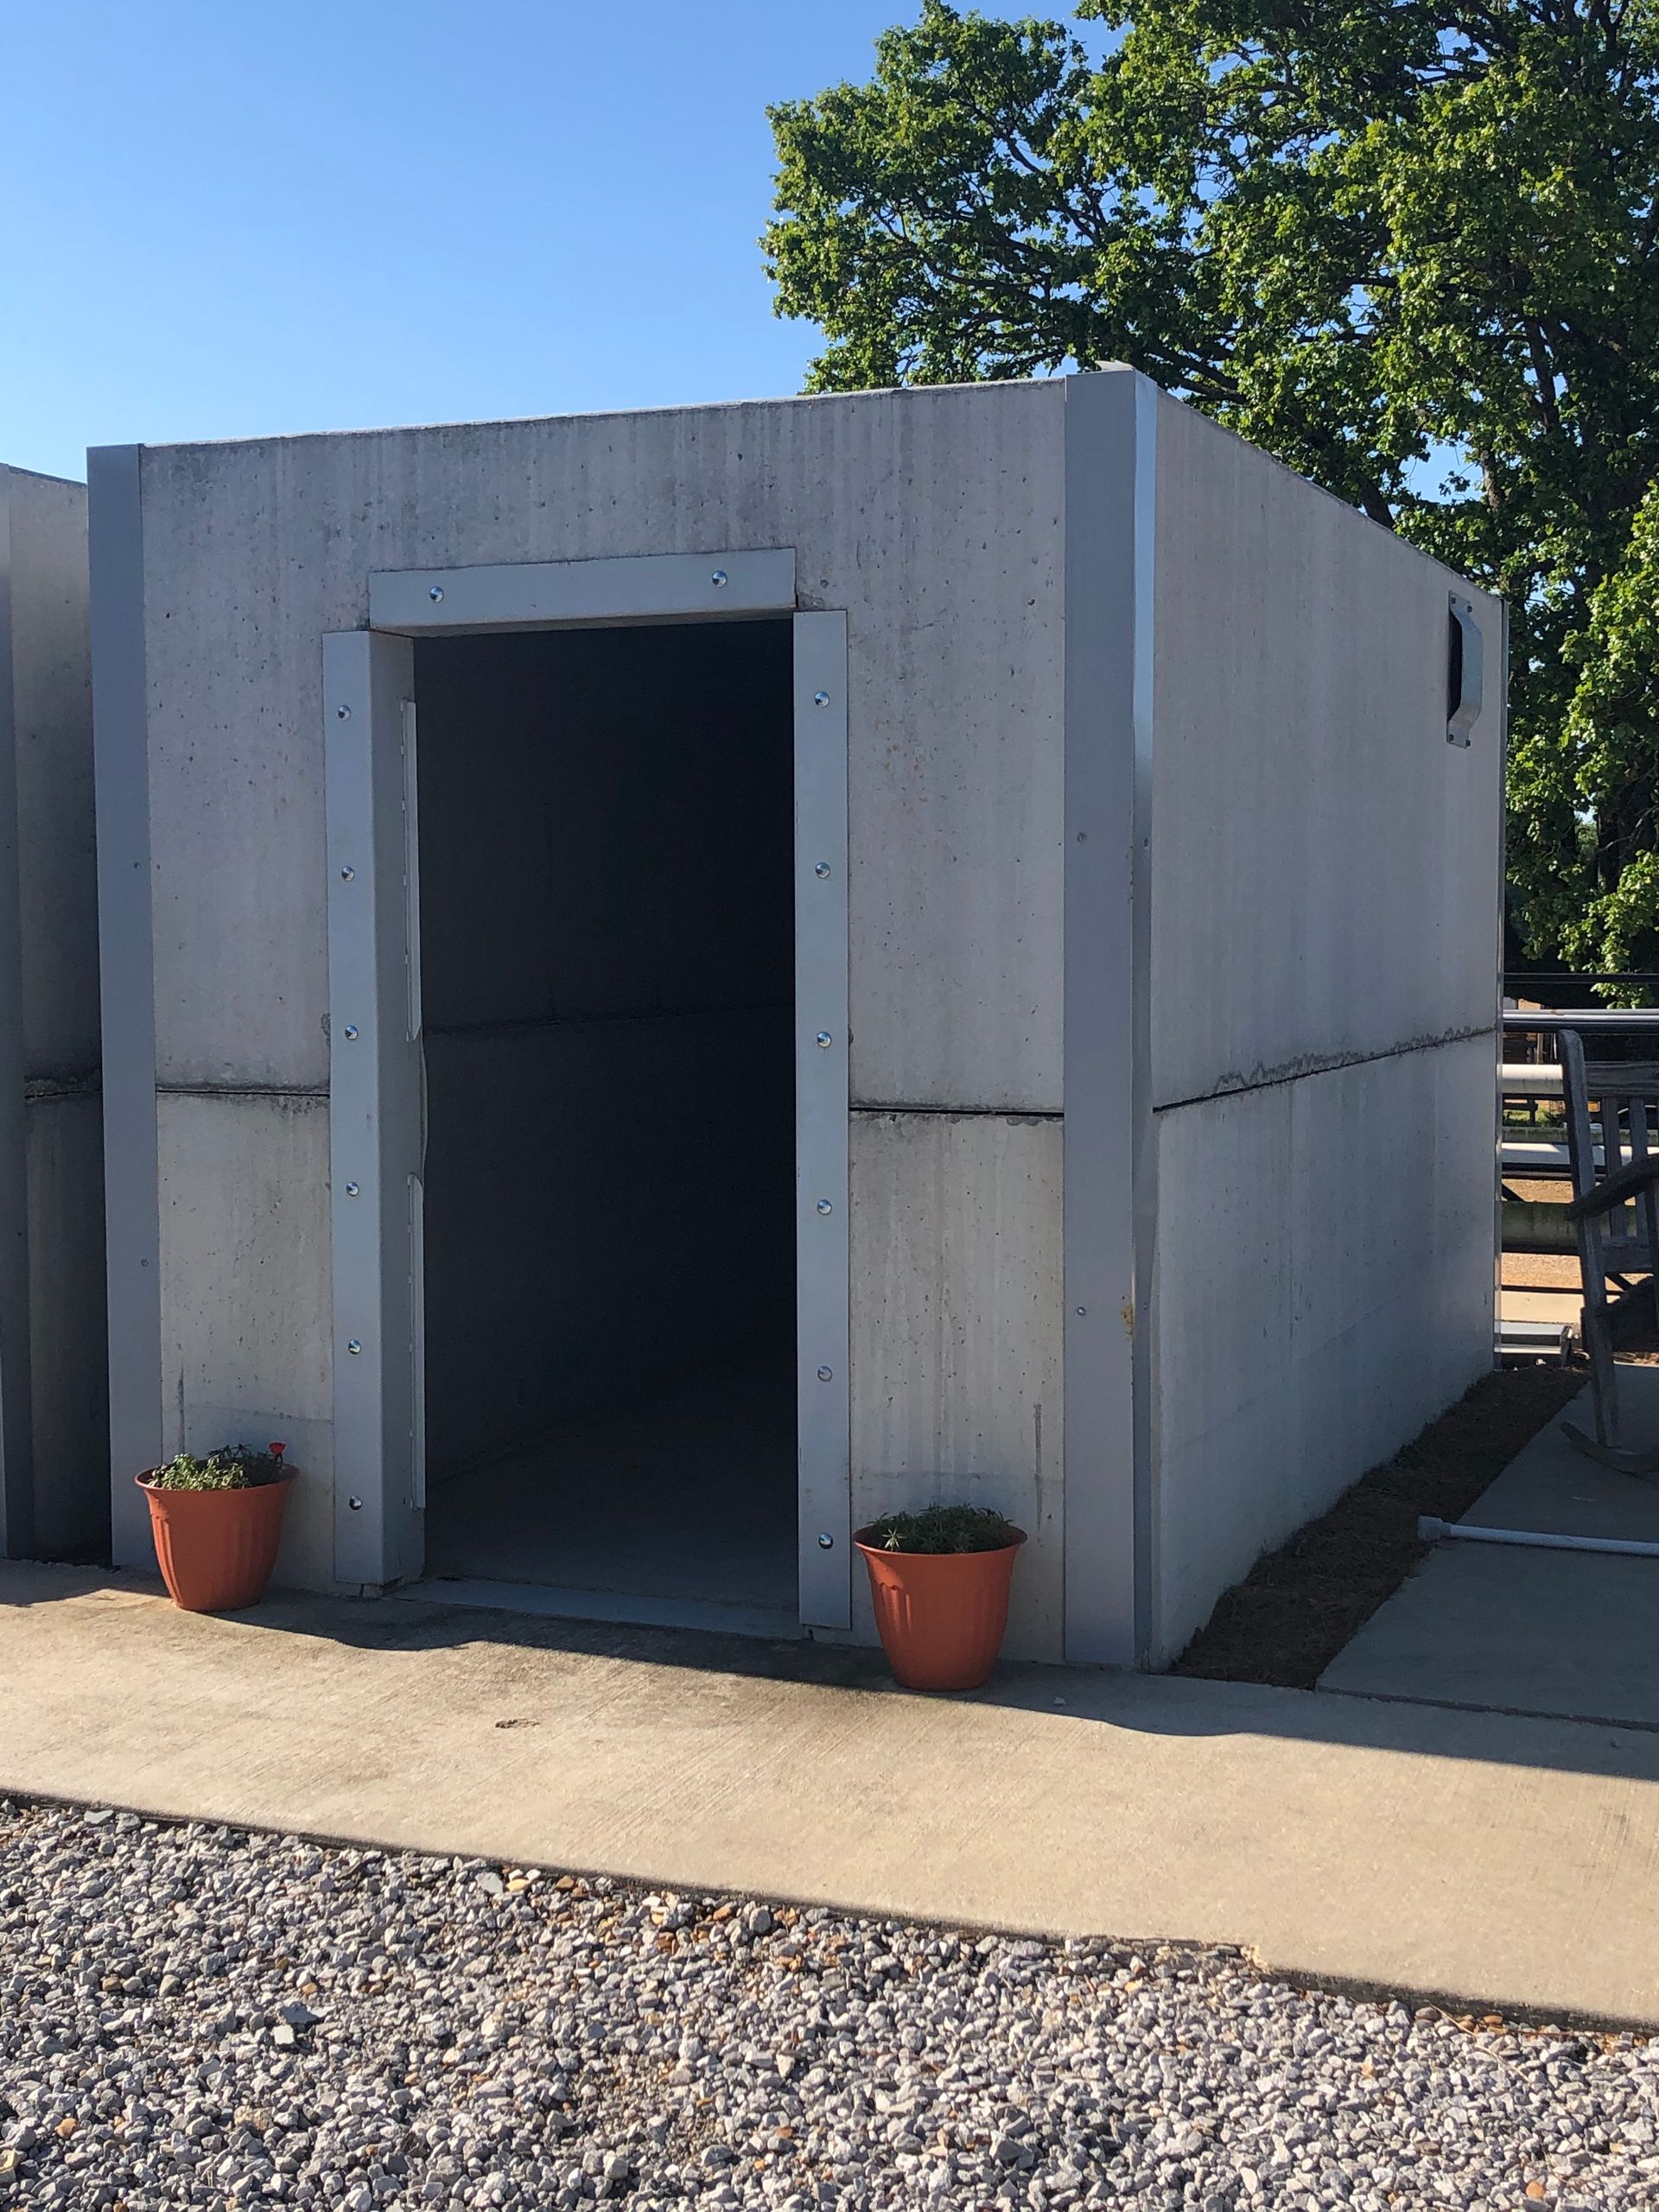 Storm Shelters in North Mississippi and Oxford, MS